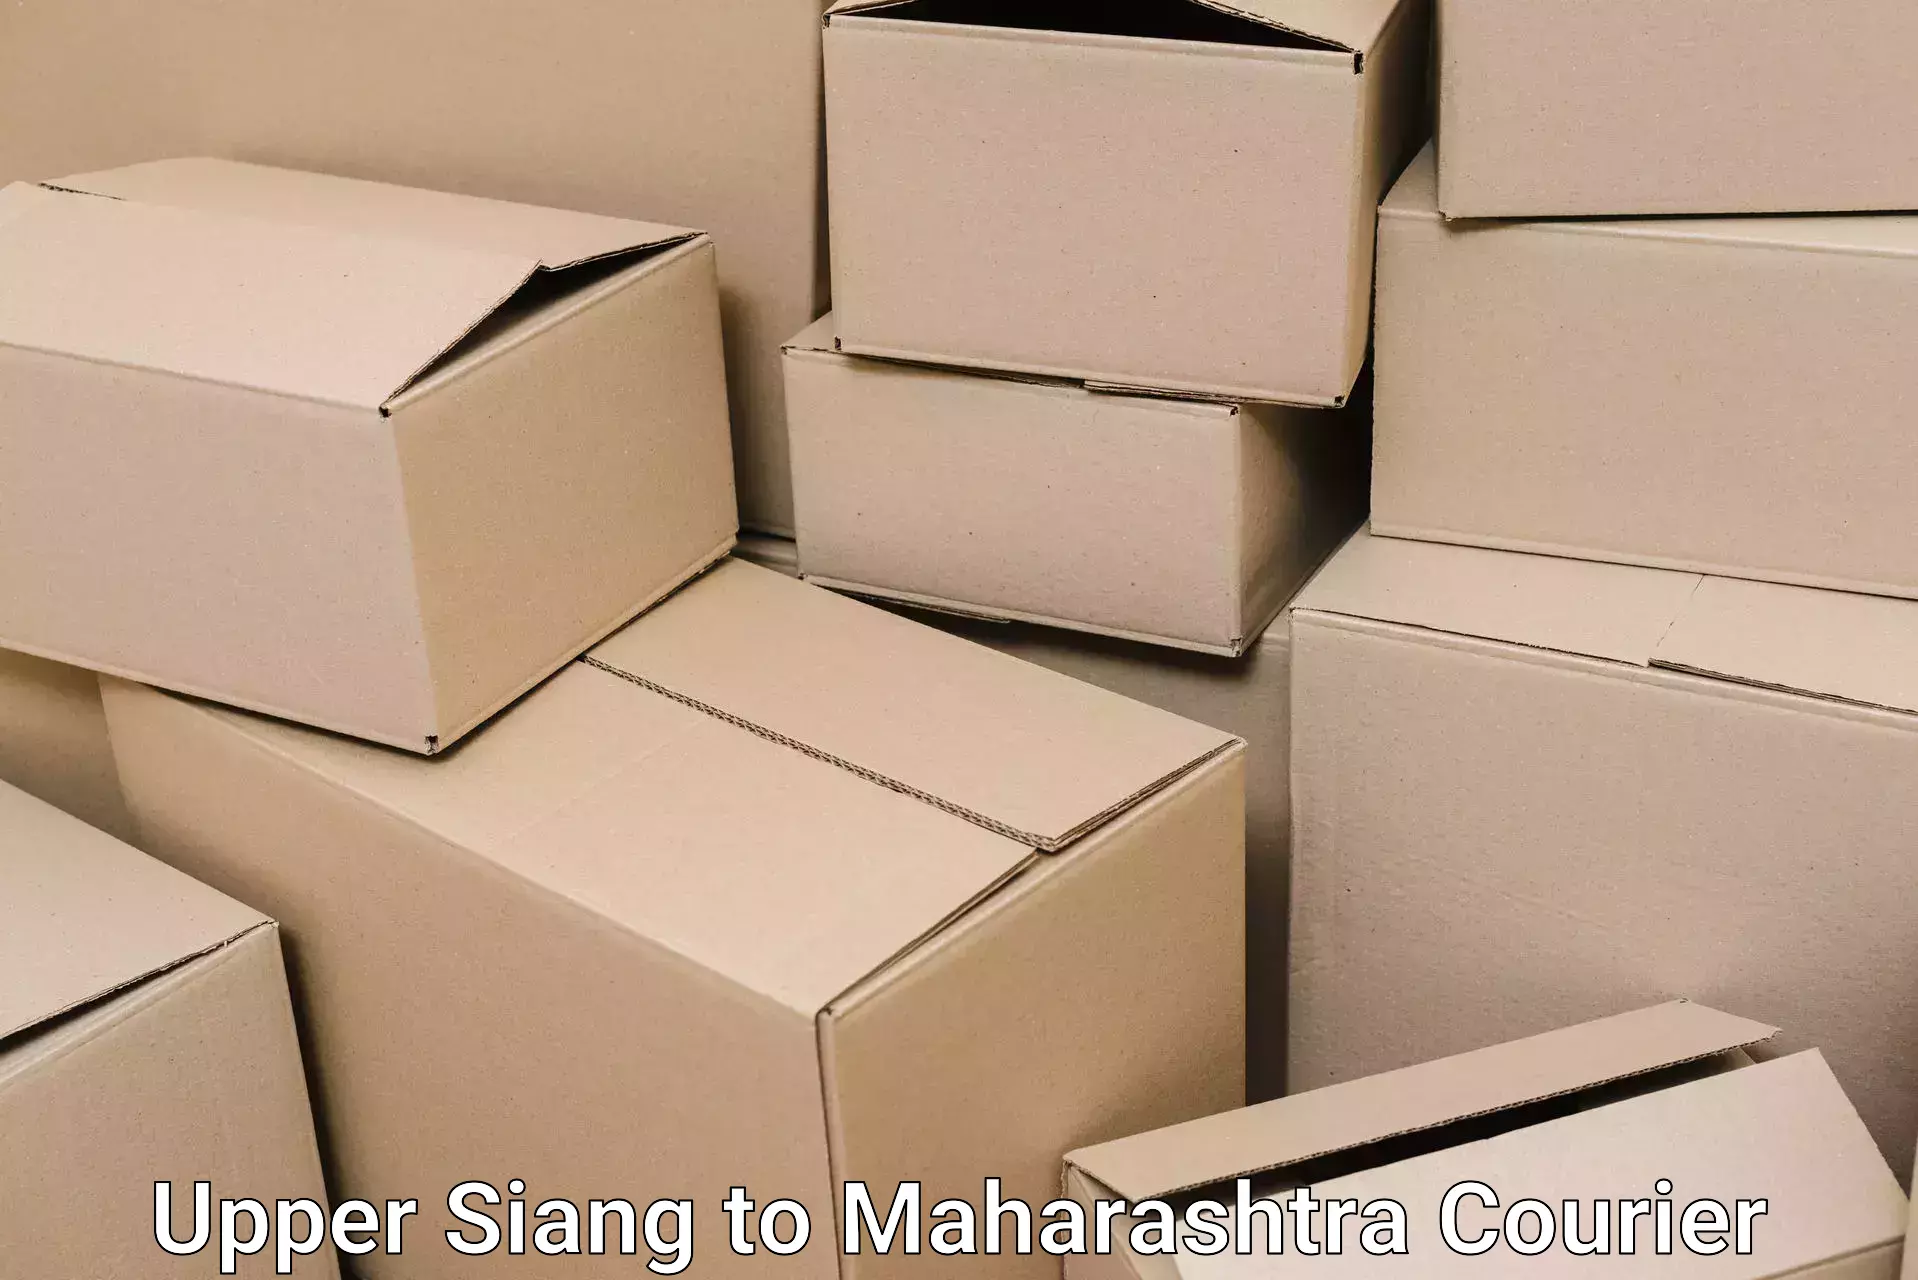 Residential moving experts Upper Siang to Maharashtra